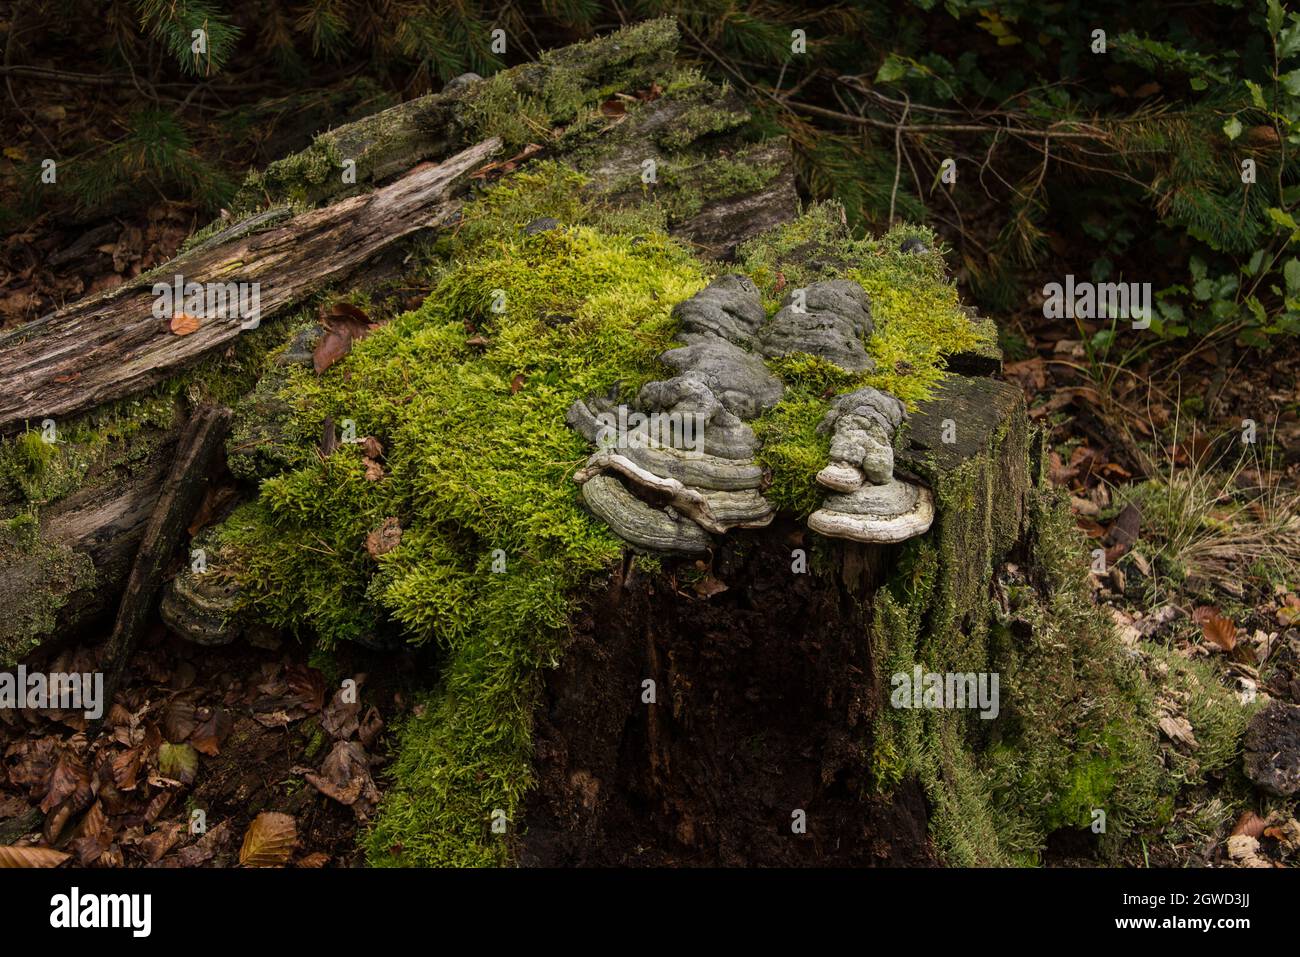 Polyporales fungus growing on a rotten stump in a Northern Bavarian forest Stock Photo